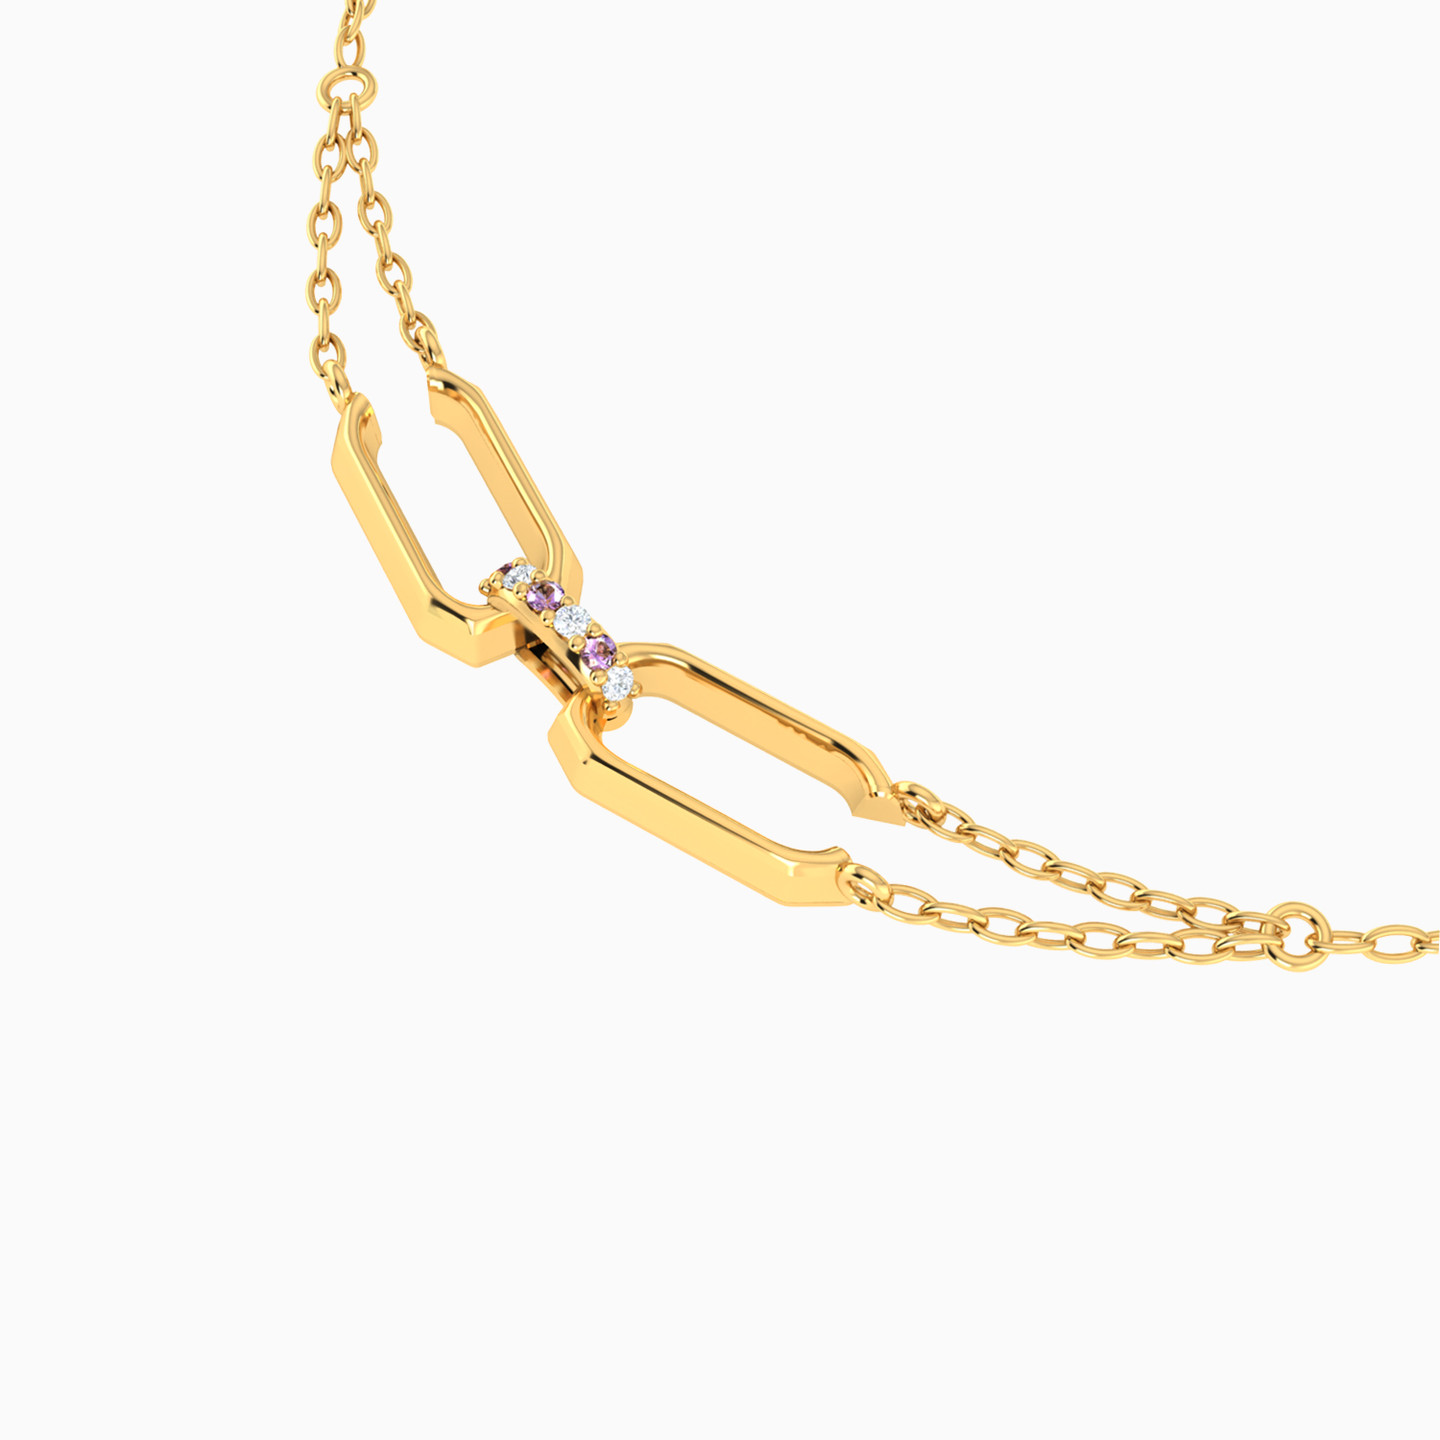 Rectangle Shaped Colored Stones Chain Bracelet in 18K Gold - 3